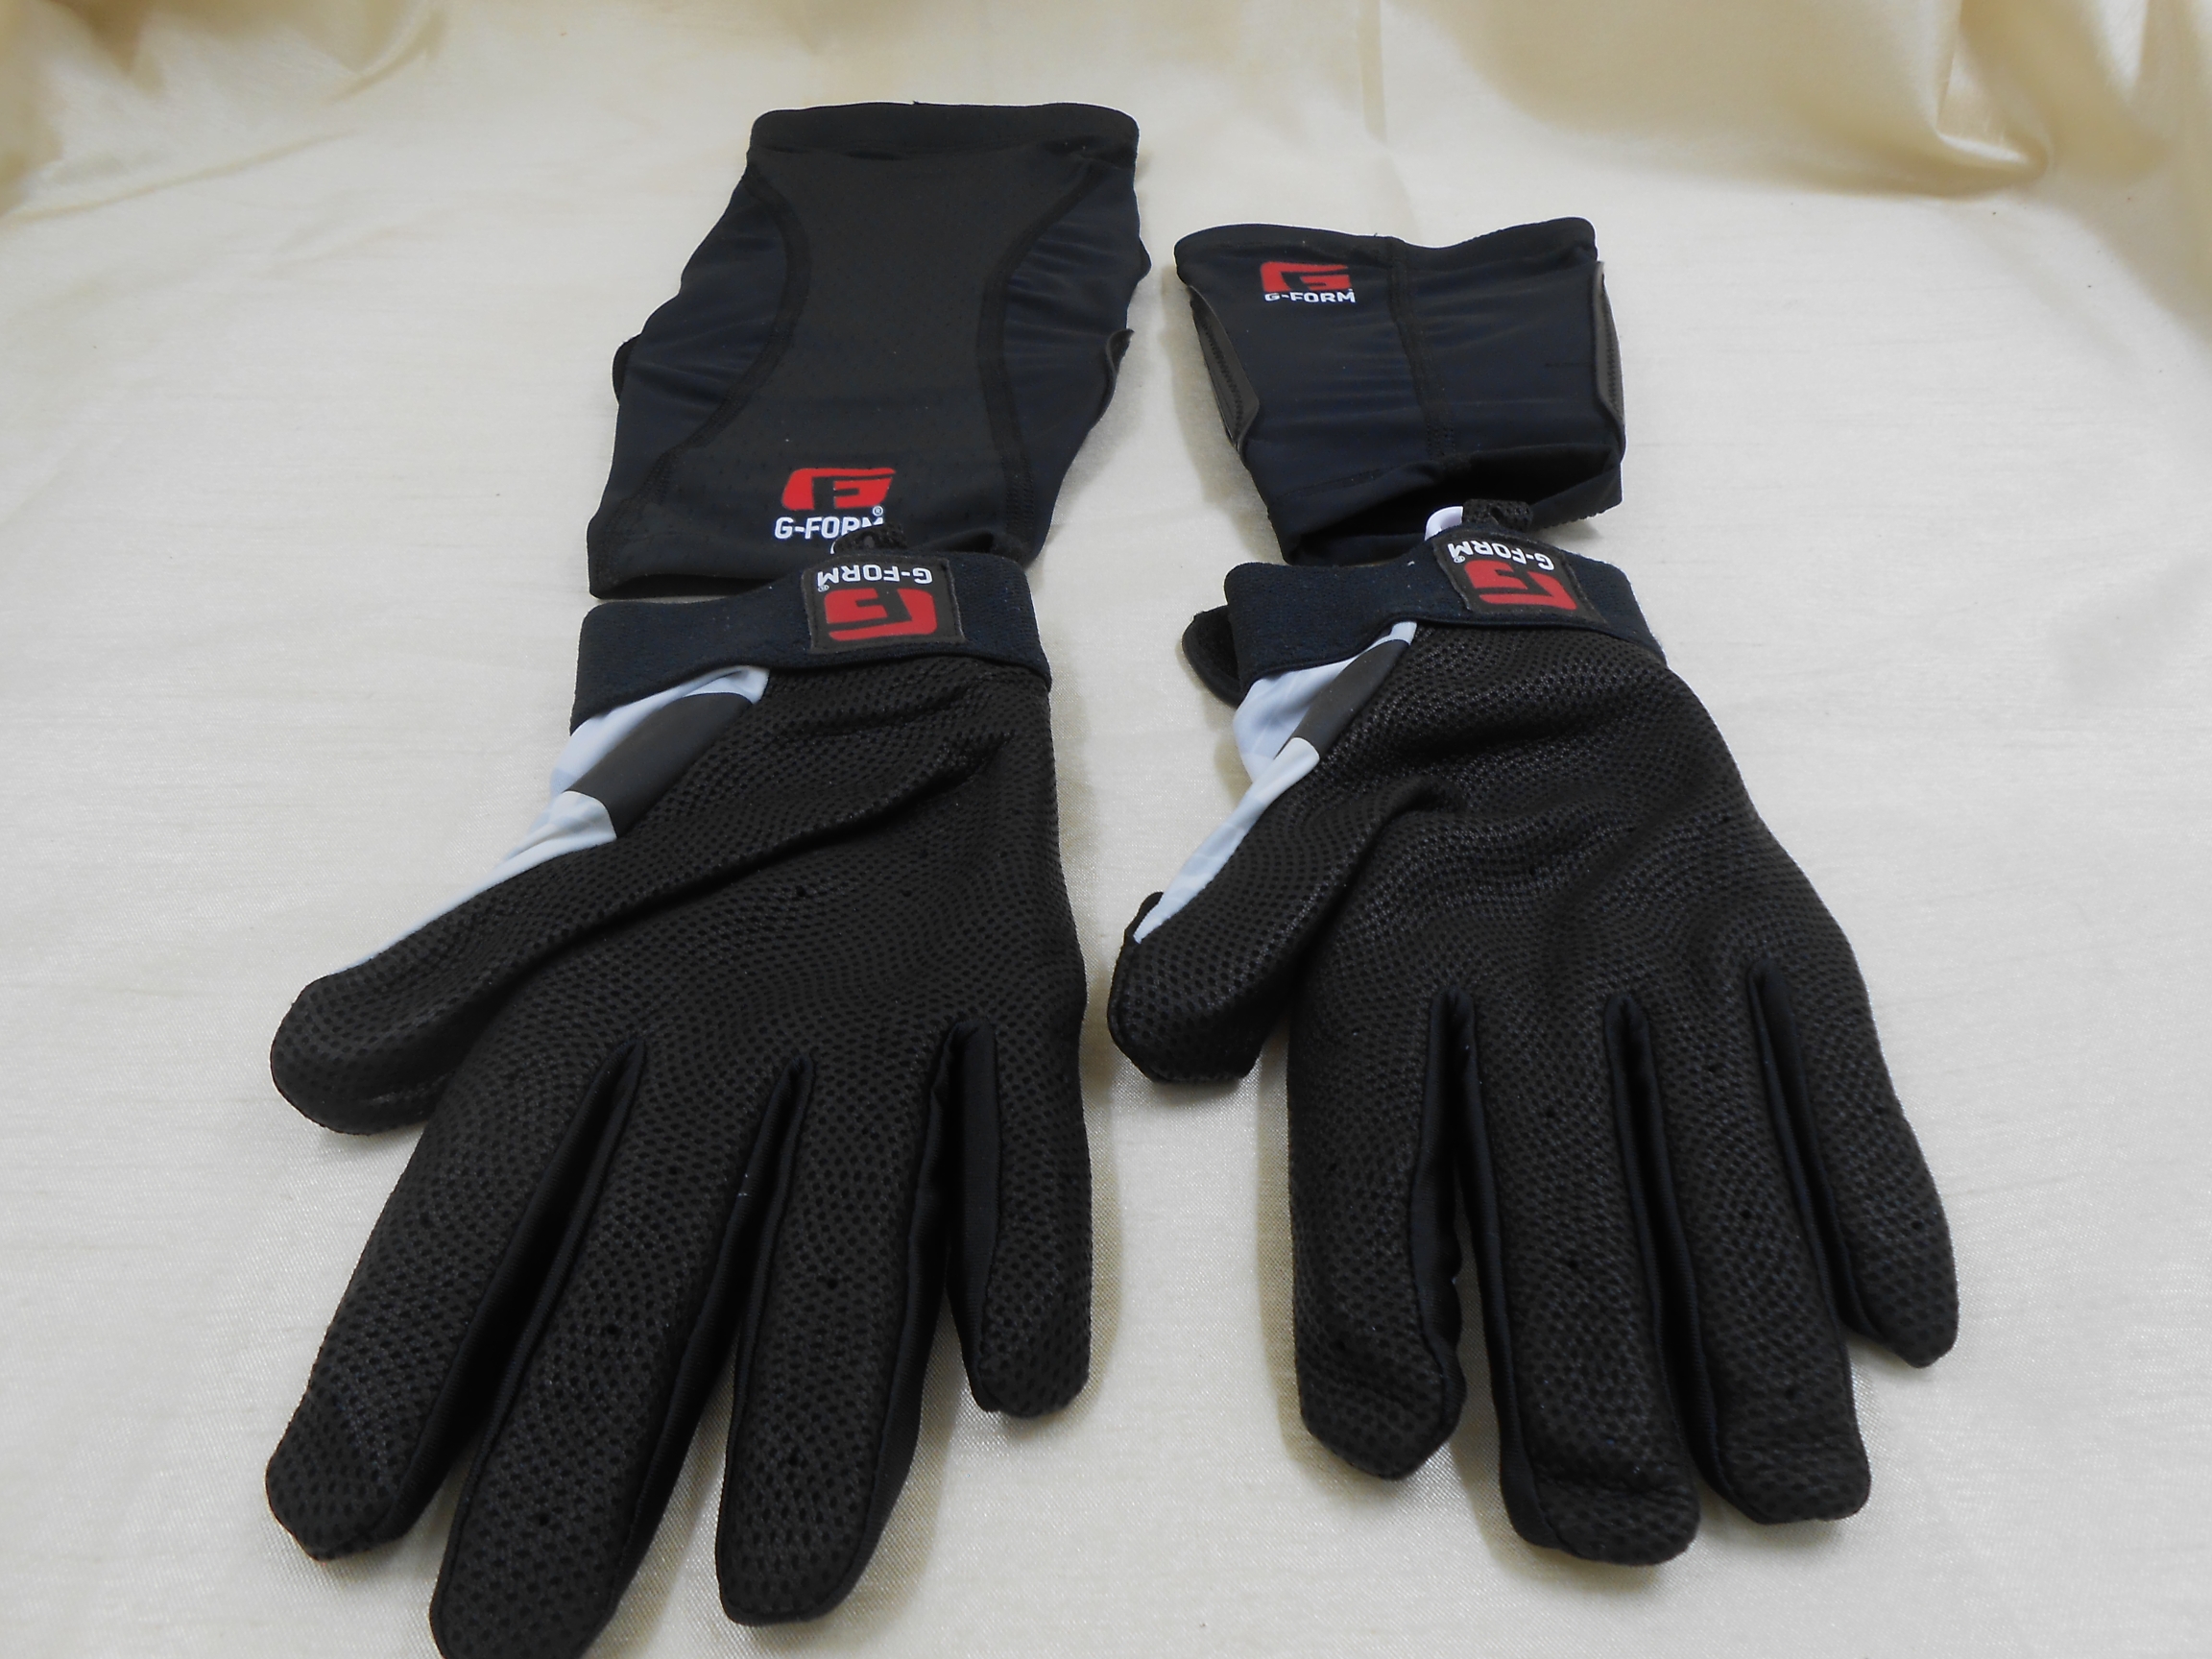 New G-Form Senior Pull On Elbow and Wrist Protection with G-Form Batting Gloves